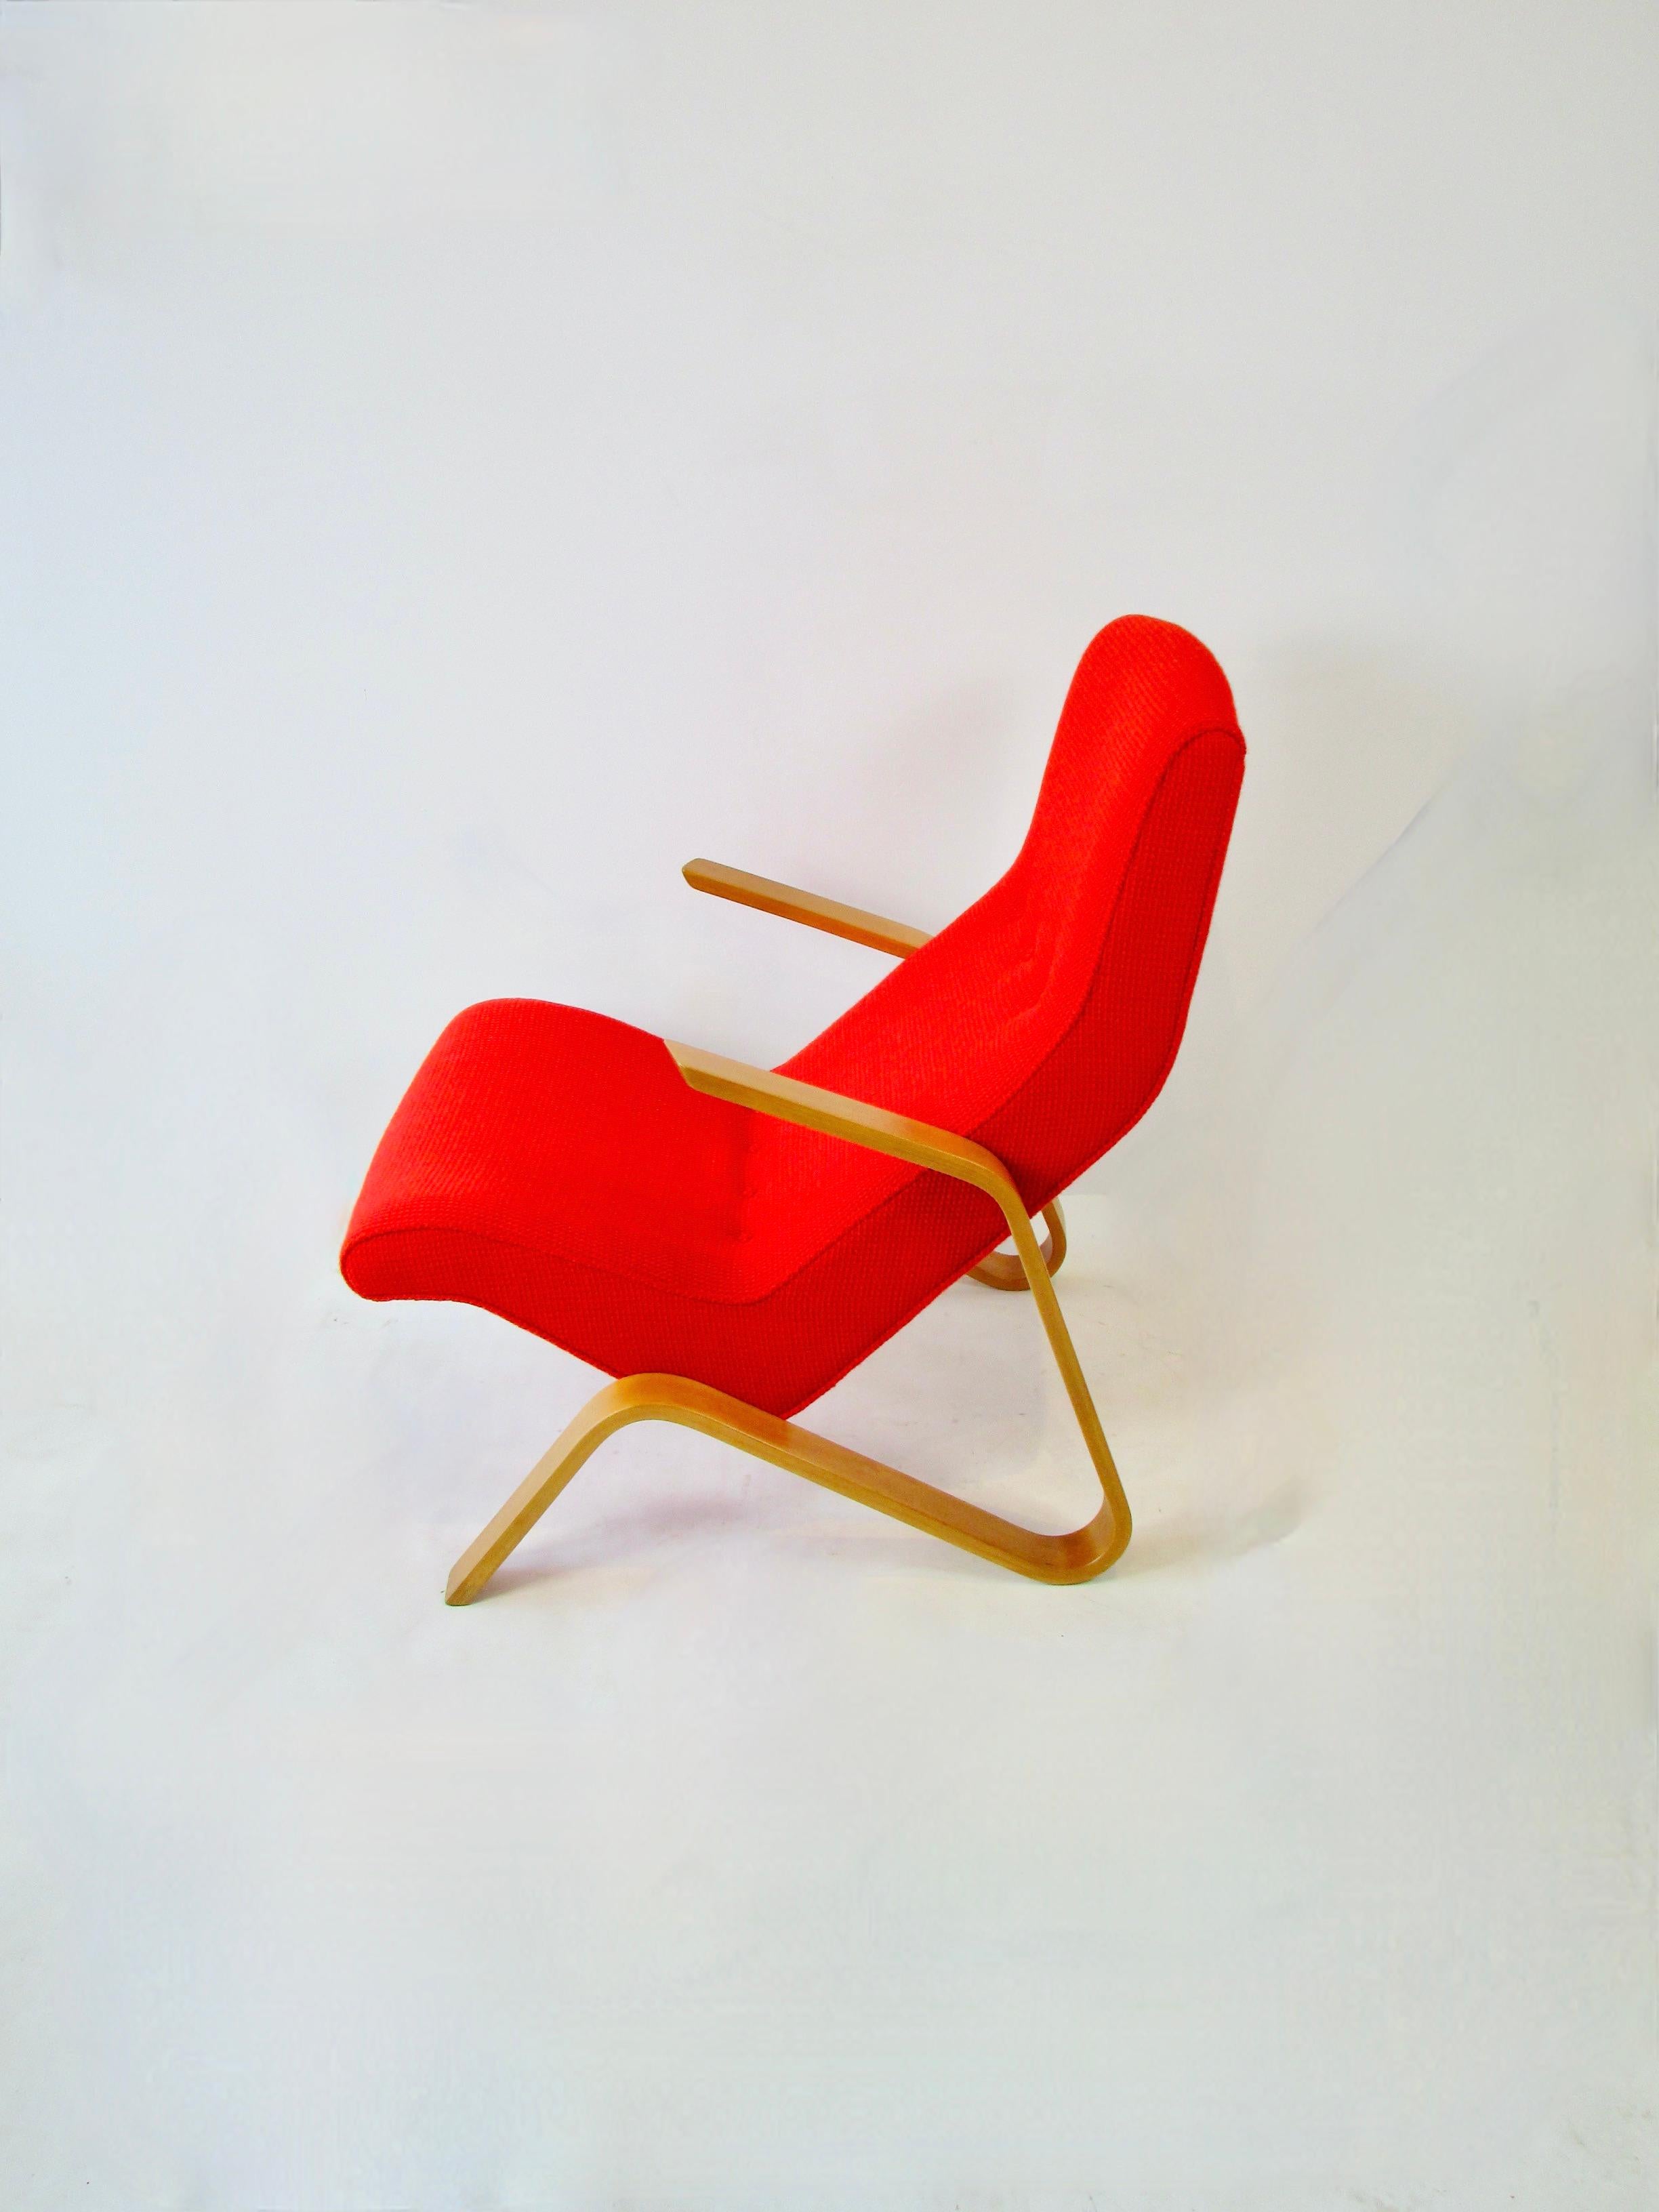 American Recently Restored Eero Saarinen for Knoll Model 61 Grasshopper Lounge Chair For Sale